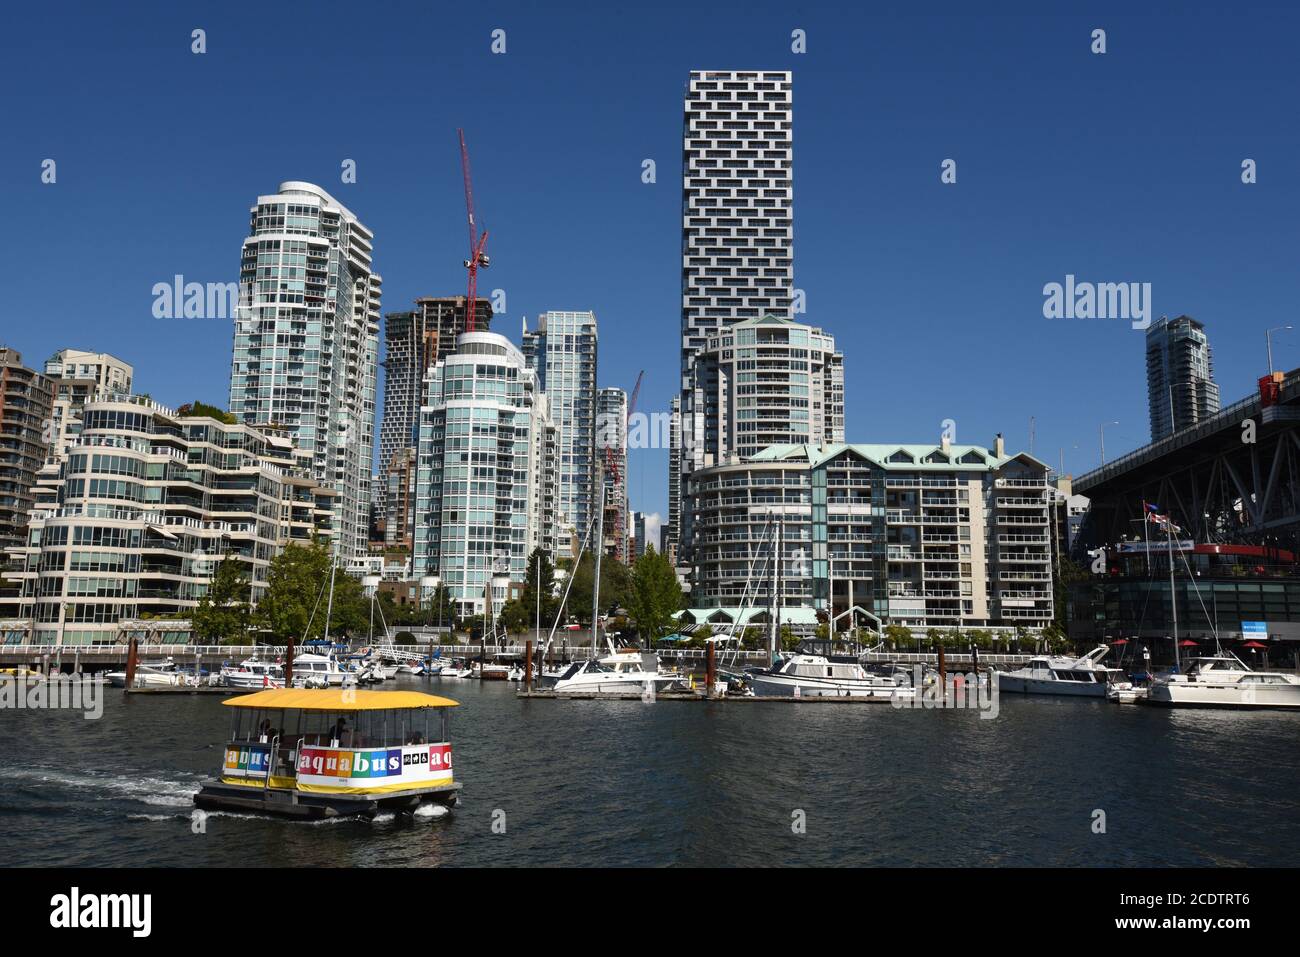 An Aquabus ferry carries foot passengers across False Creek and past downtown apartments and condominiumns on the skyline of Vancouver, British Columb Stock Photo